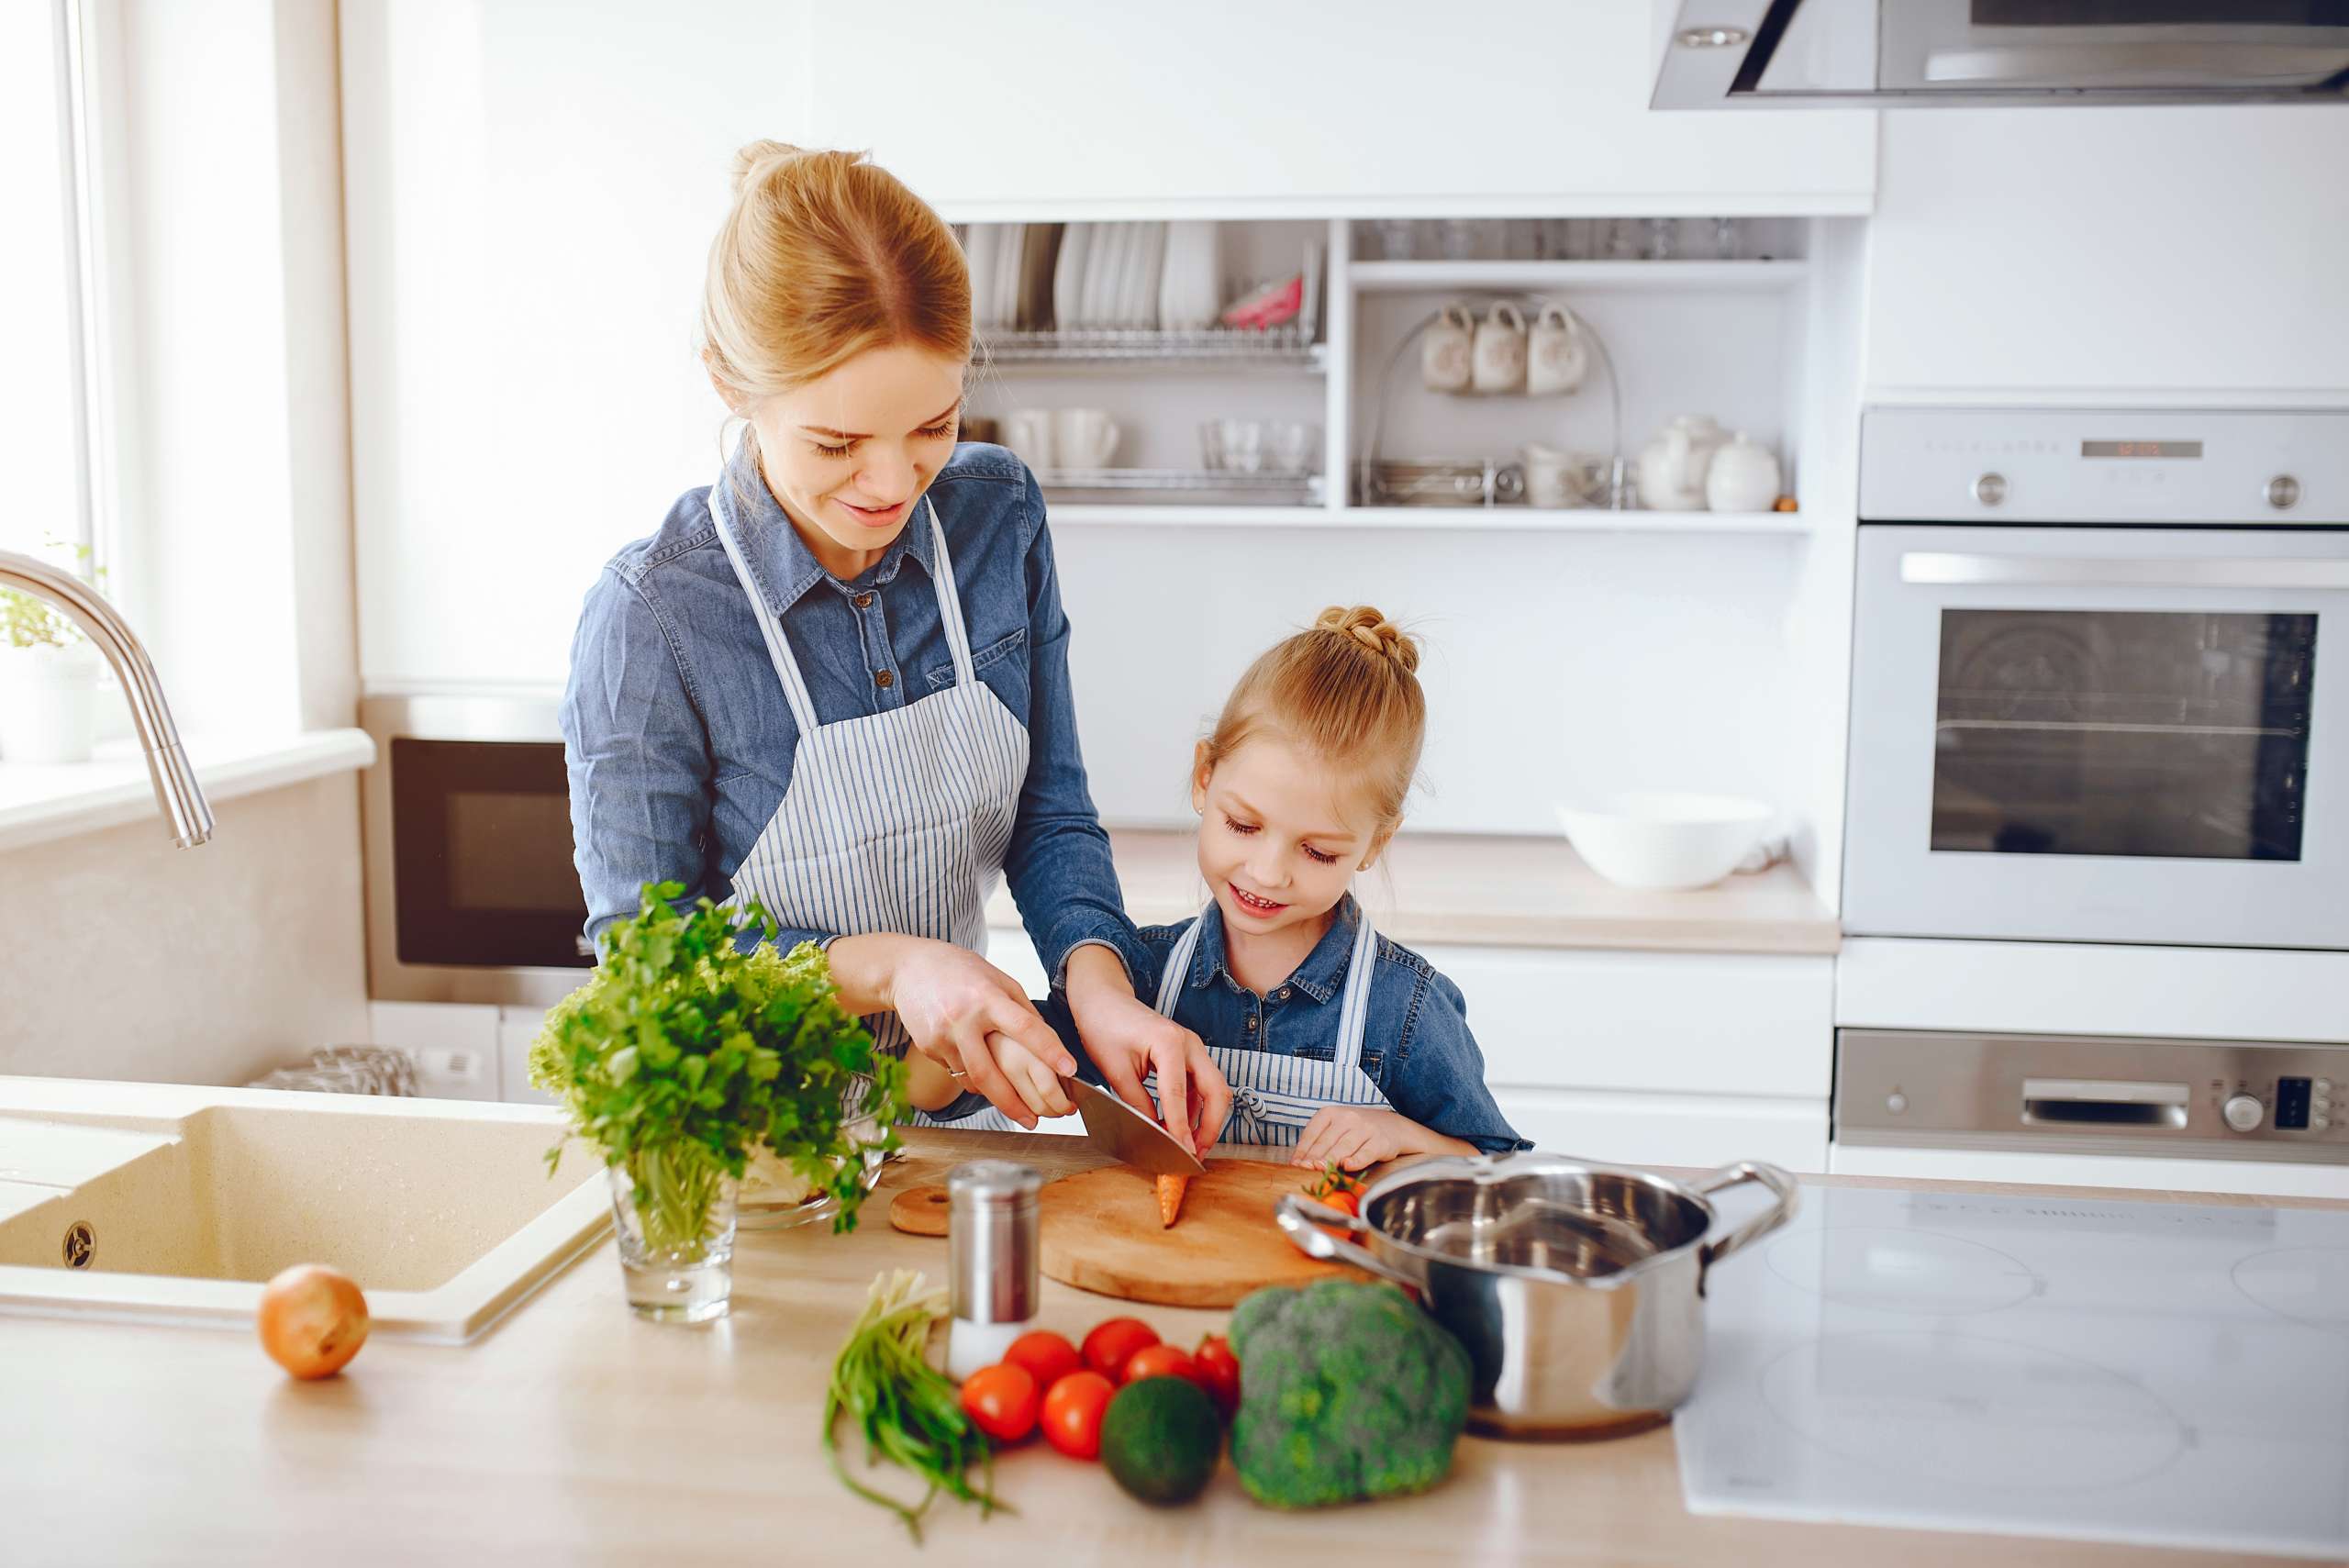 How to motivate your child to eat healthy?